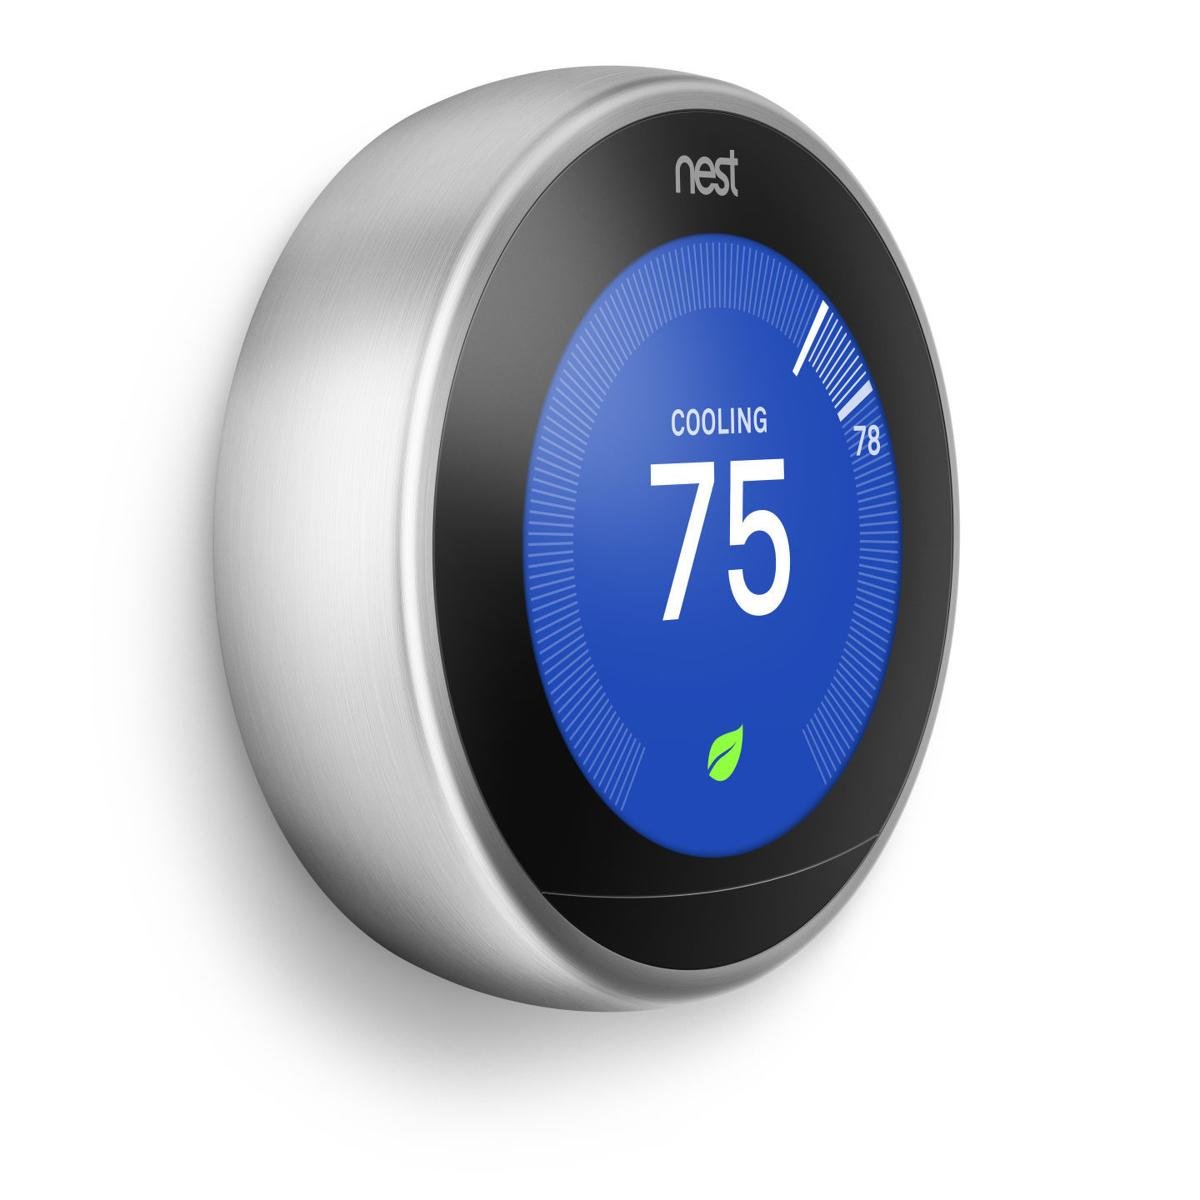 tucson-electric-floats-pilot-program-to-control-your-thermostat-local